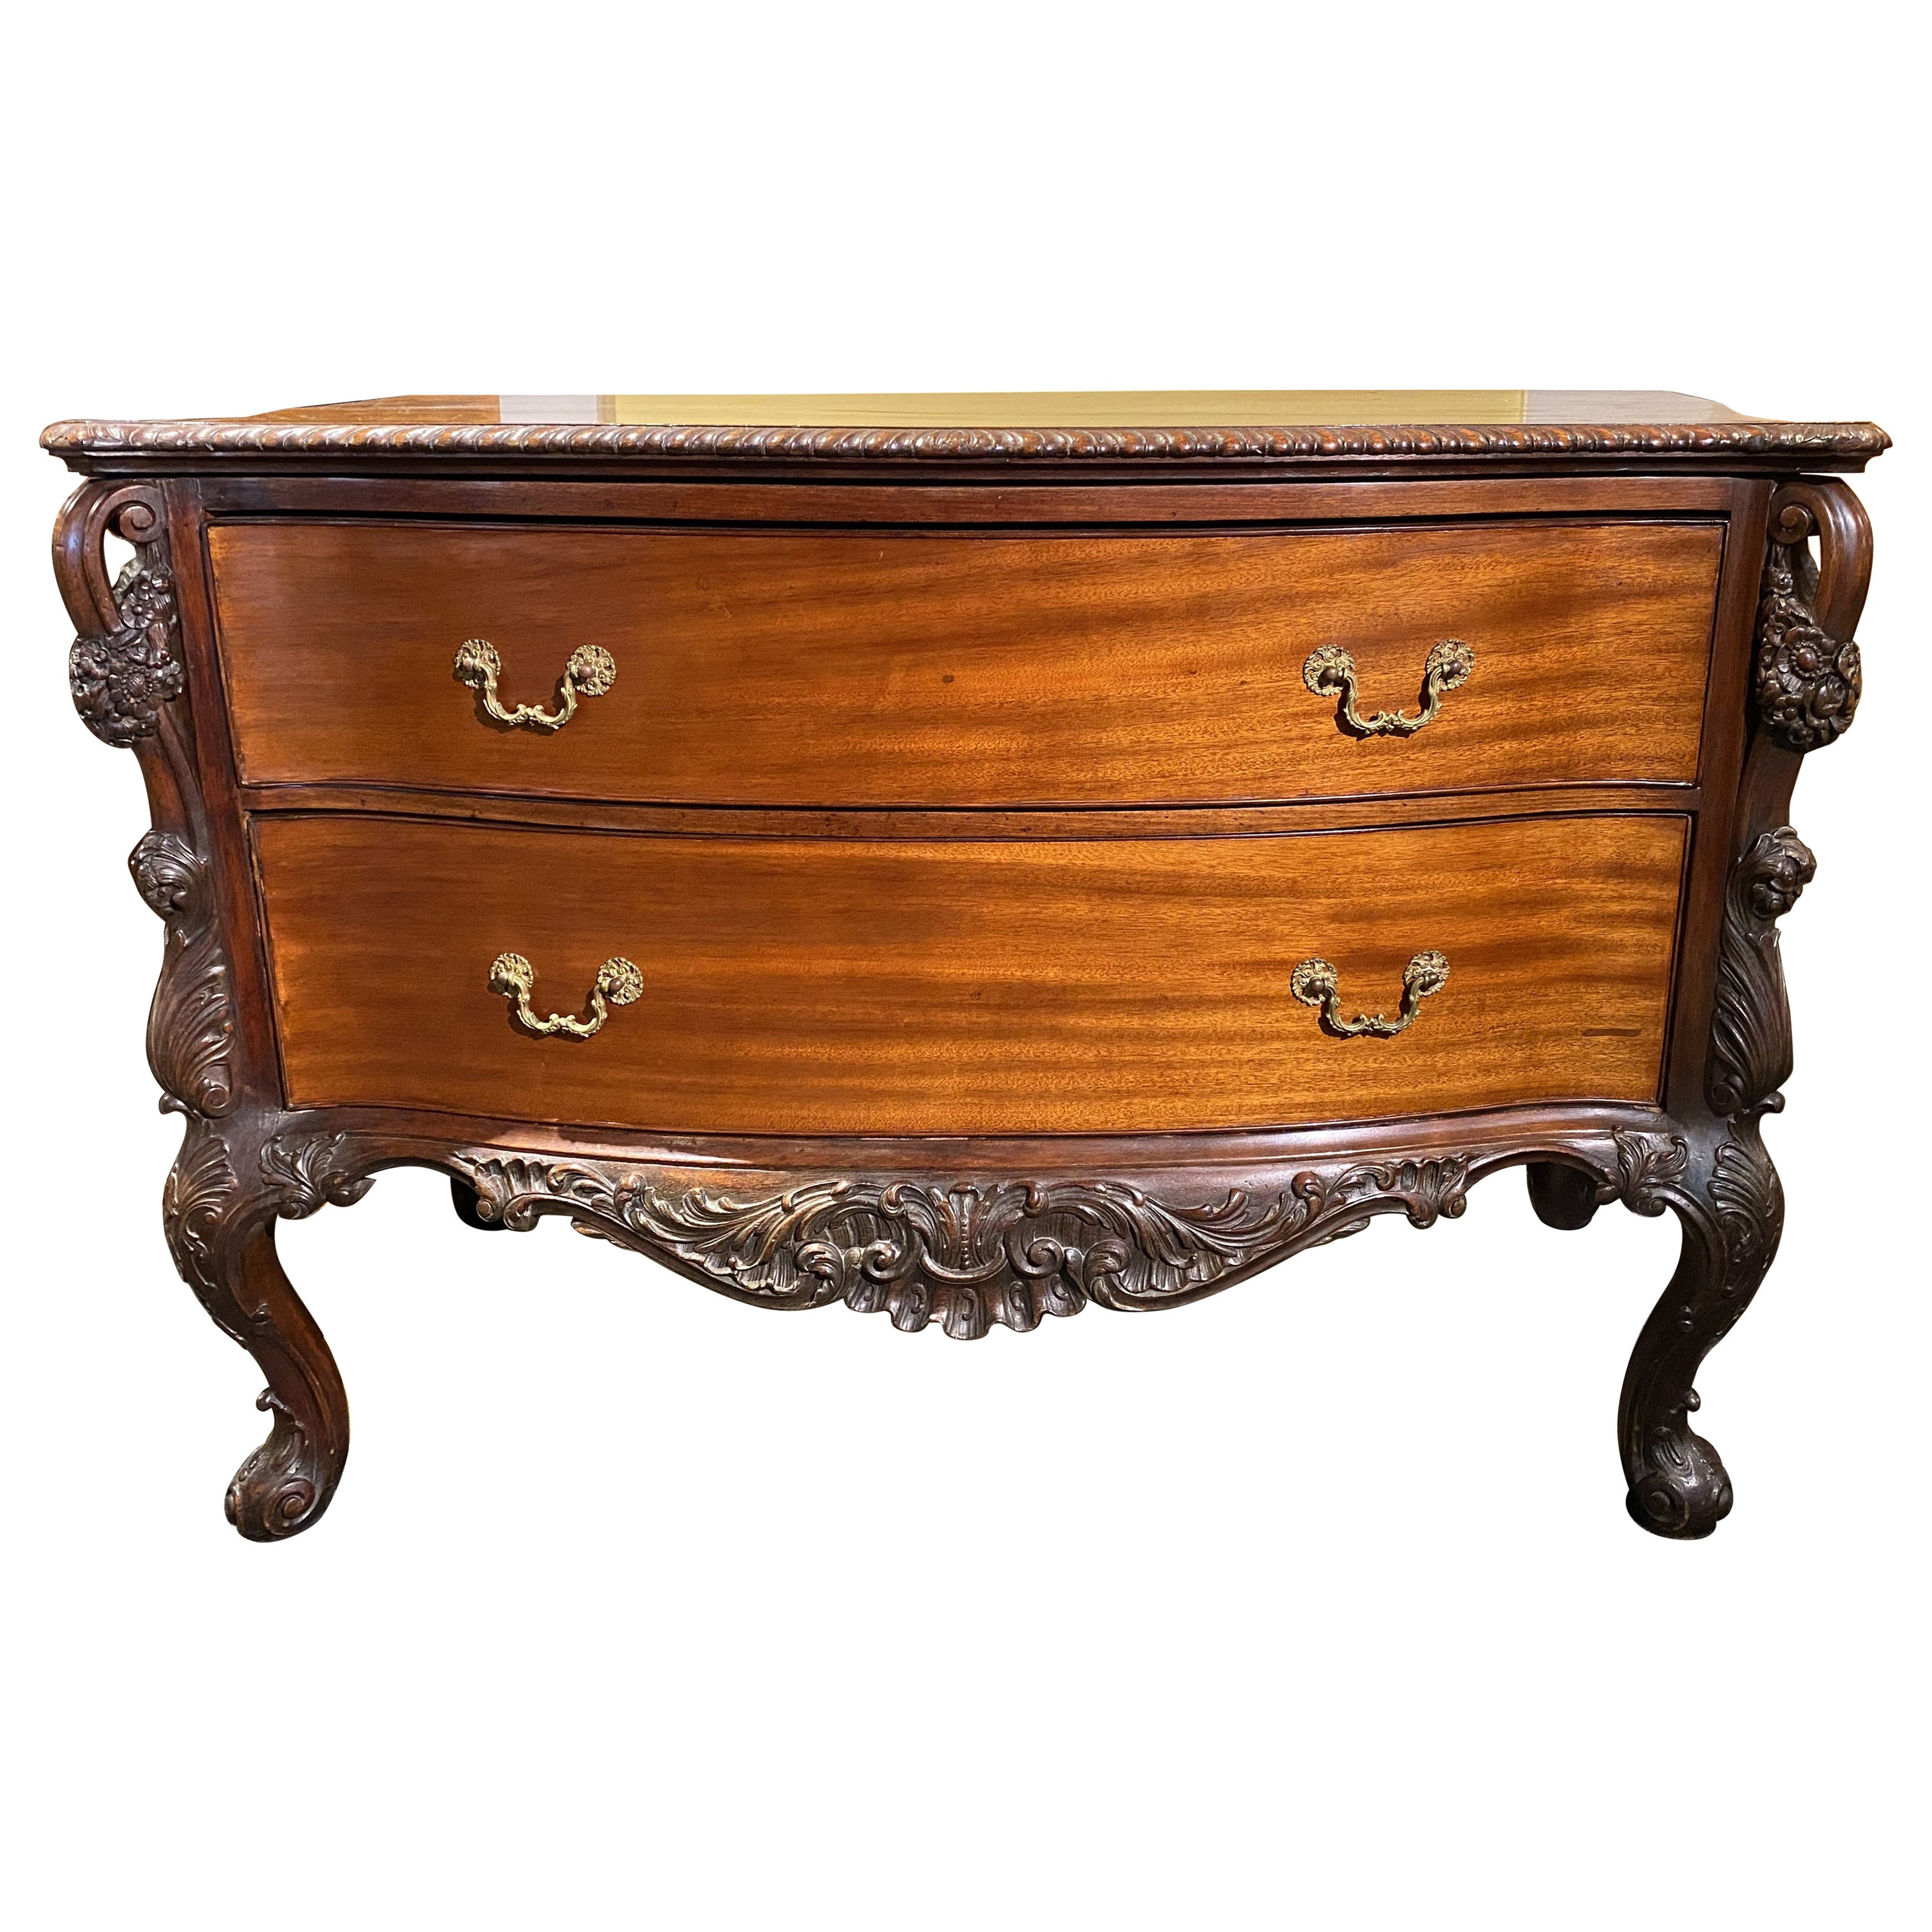 19th Century Rococo Foliate & Scrollwork Carved Commode or Chest in Mahogany For Sale